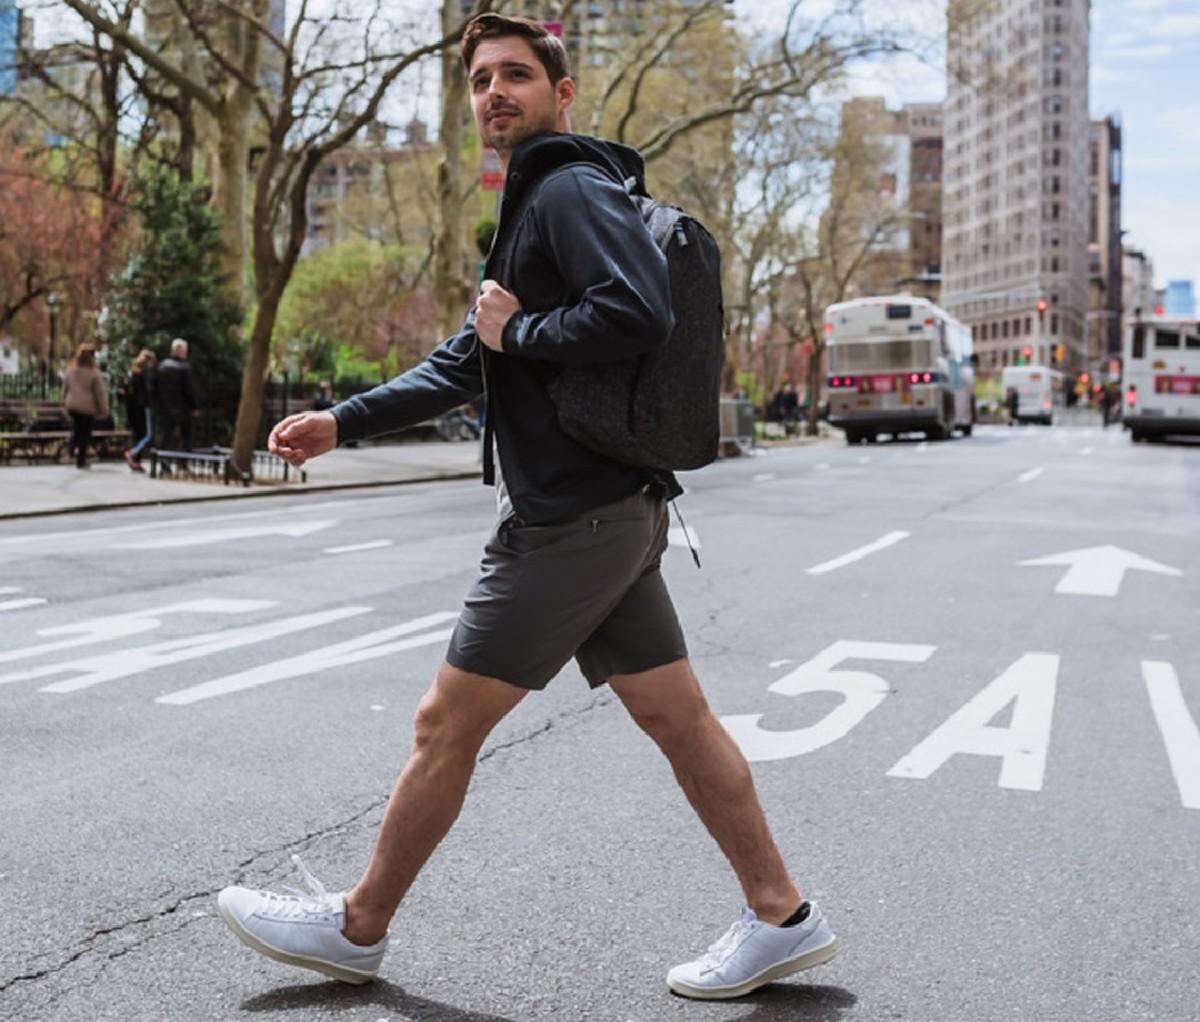 Complete with UV protection of UPF 50, the Peter Manning NYC Tech Shorts are made with “quick-dry” fabric that has plenty of stretch and are made for shorter fellas with a seven-inch inseam to allow for more movement and so they’re stylish enough to wear out to a brewery post-run.